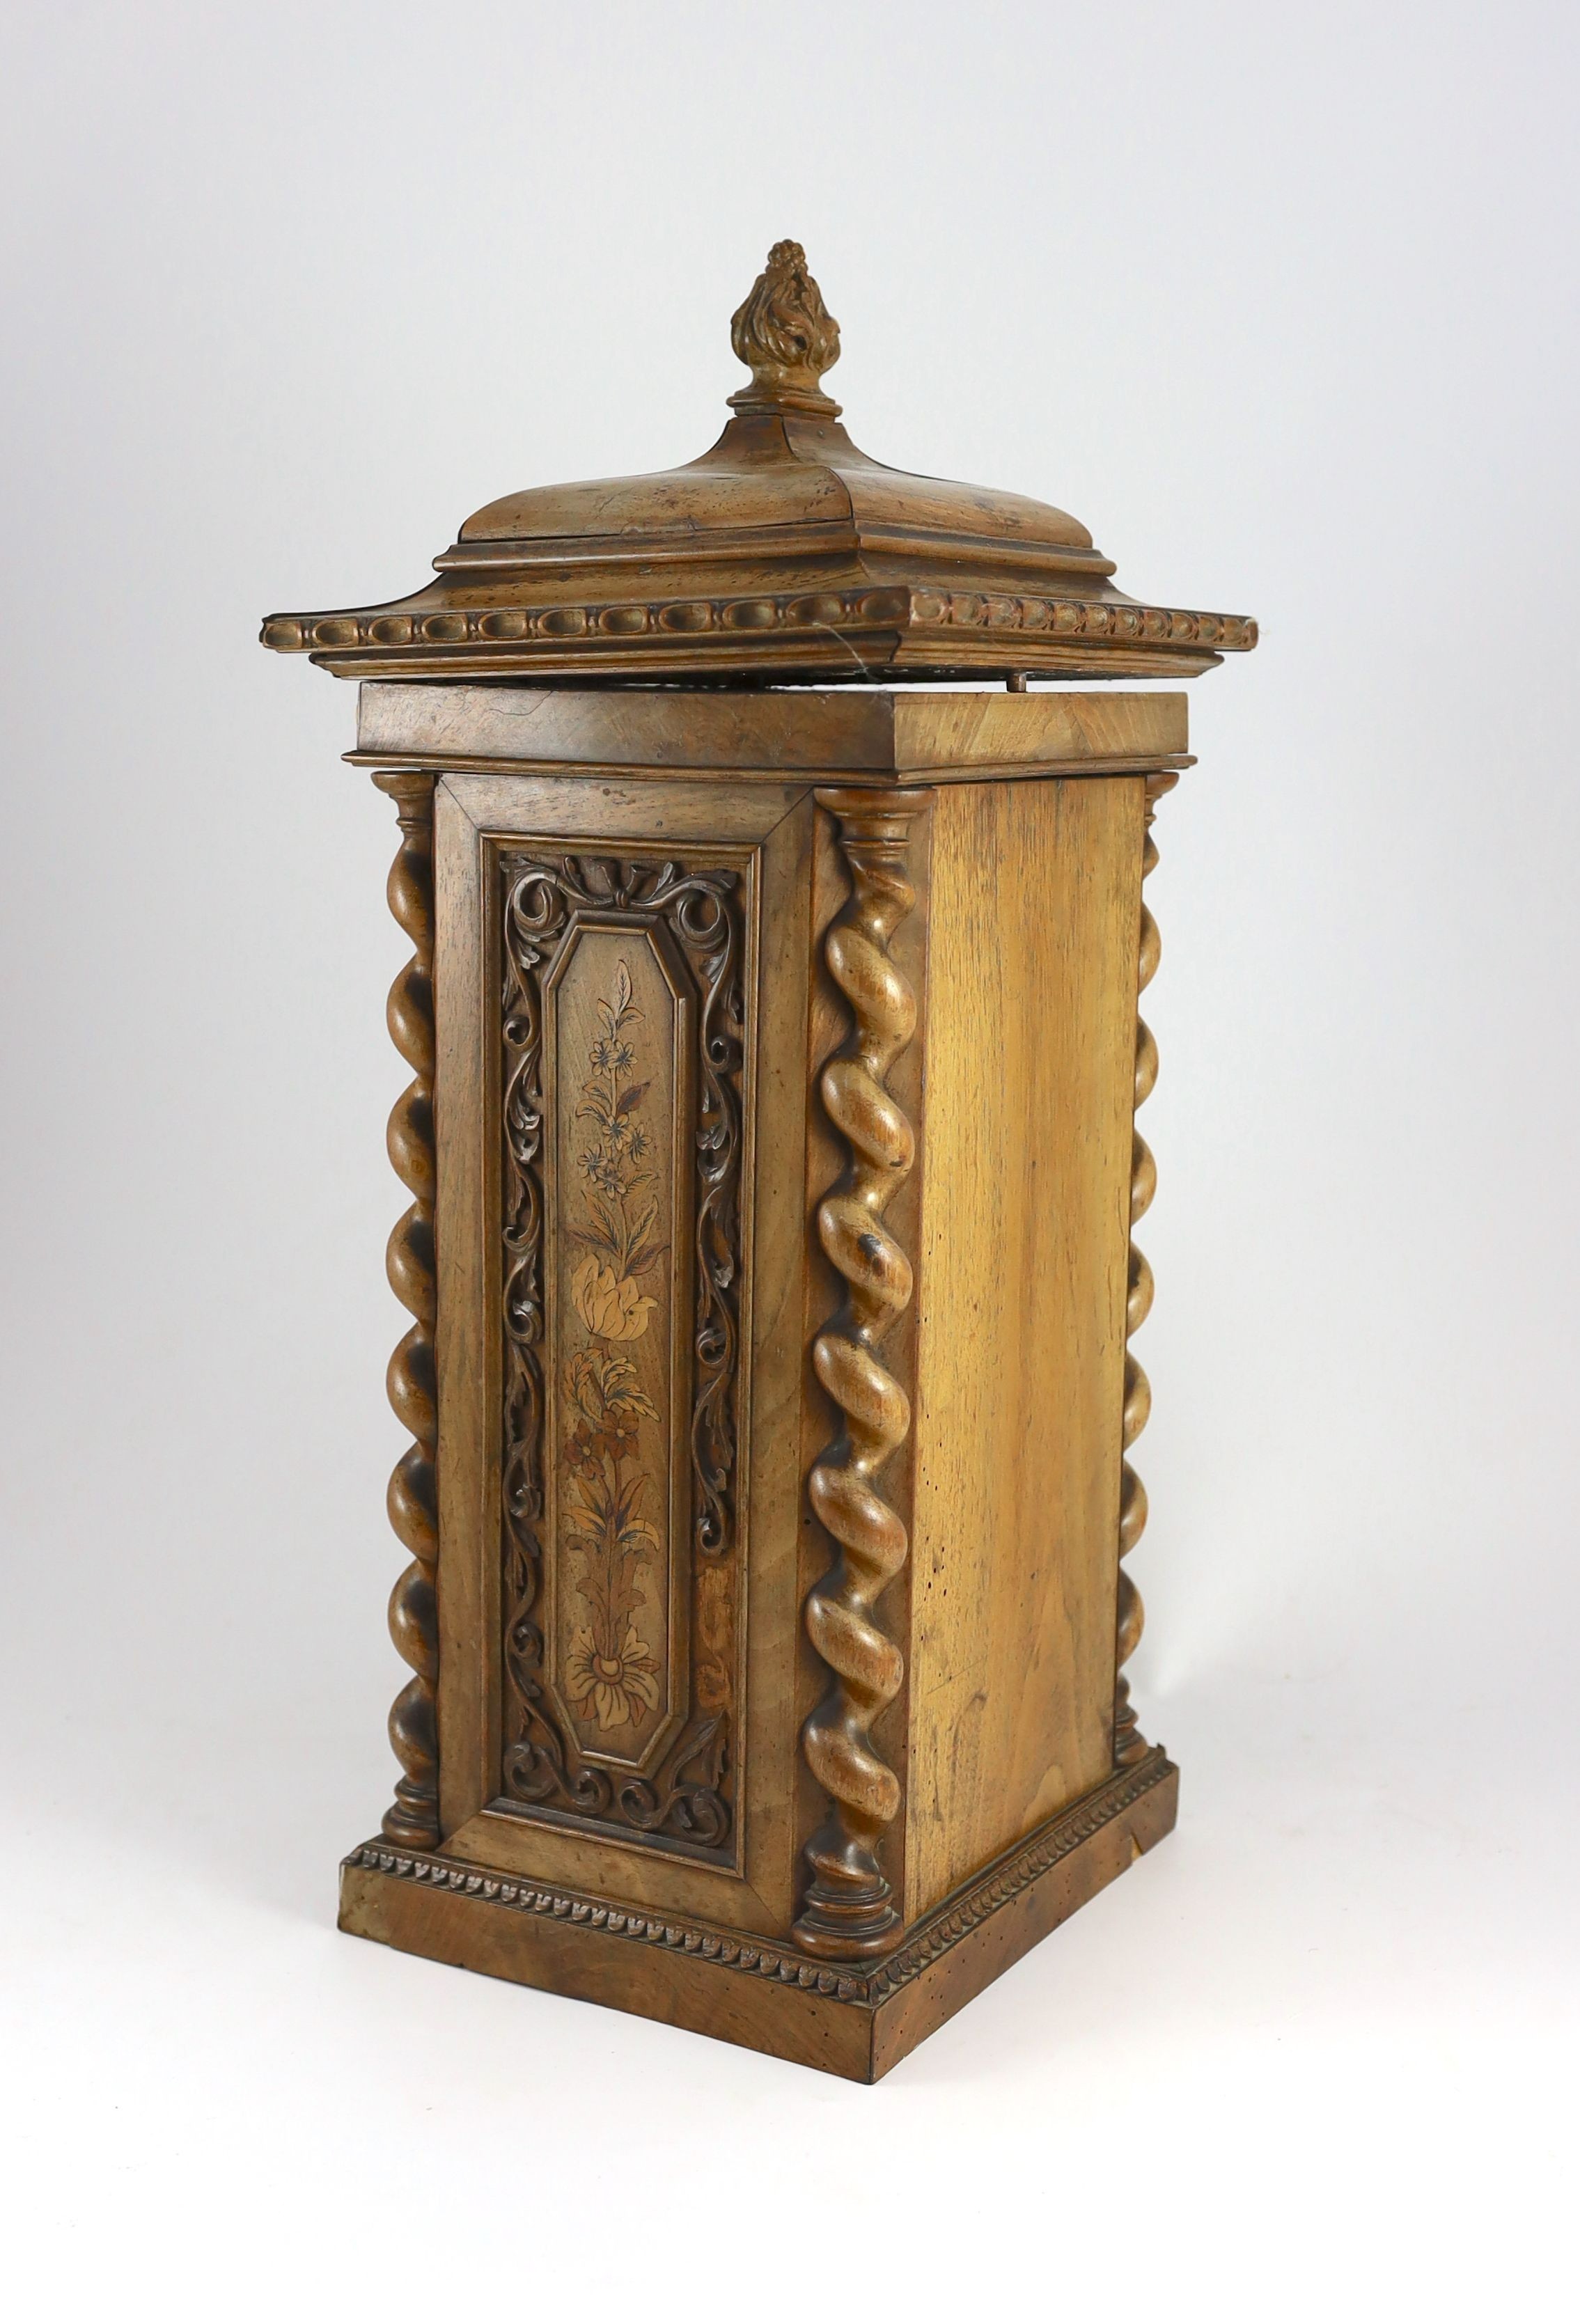 A mid 19th century French marquetry inlaid walnut country house post box-57 cms high. width 26cm depth 24cm height 56cm